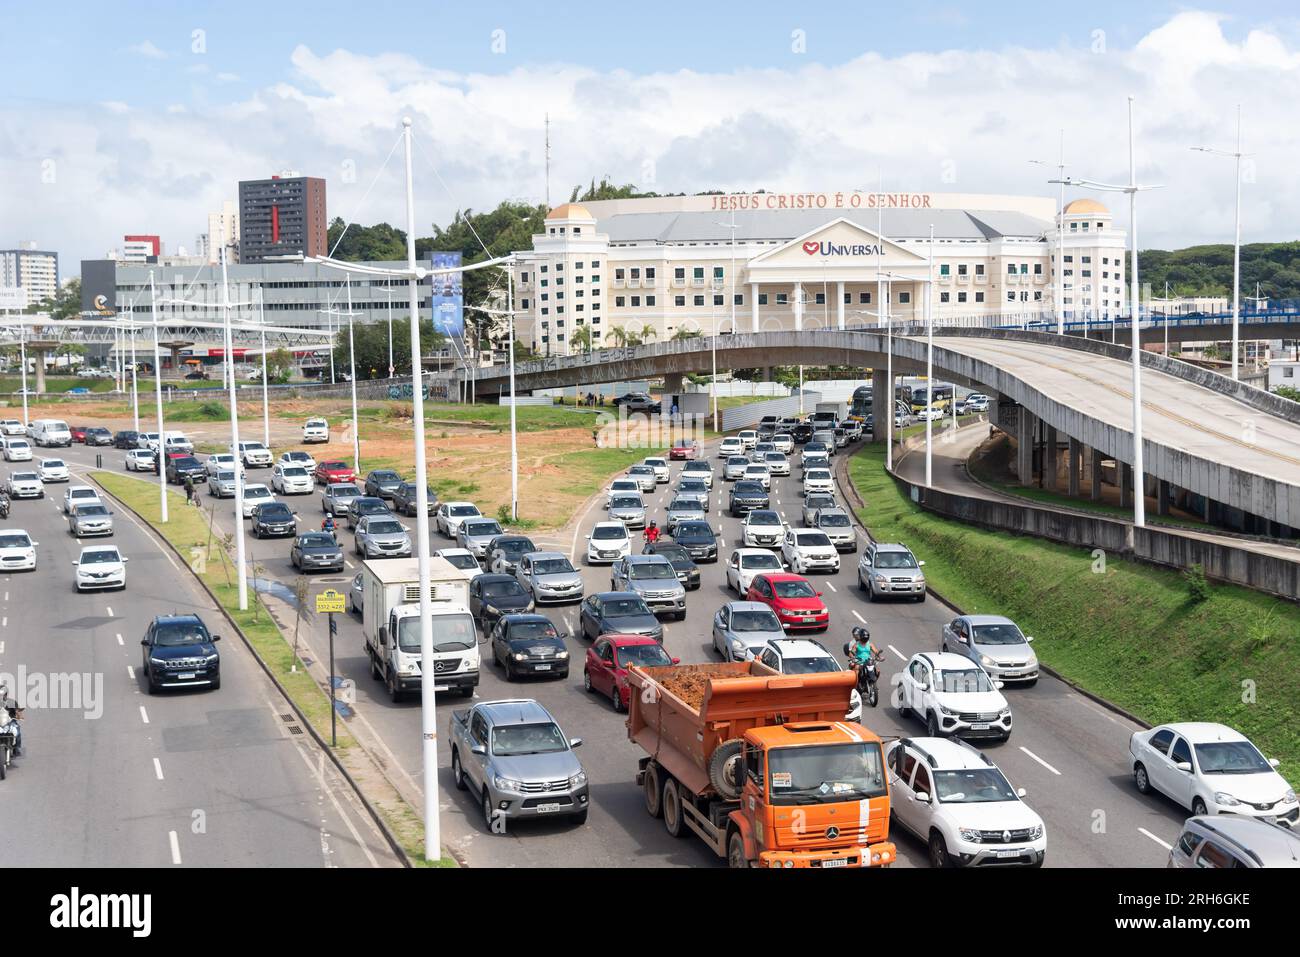 Salvador, Bahia, Brazil - August 11, 2023: Traffic movement of cars, buses and motorcycles near the Raul Seixas viaduct on Avenida Tancredo Neves in S Stock Photo